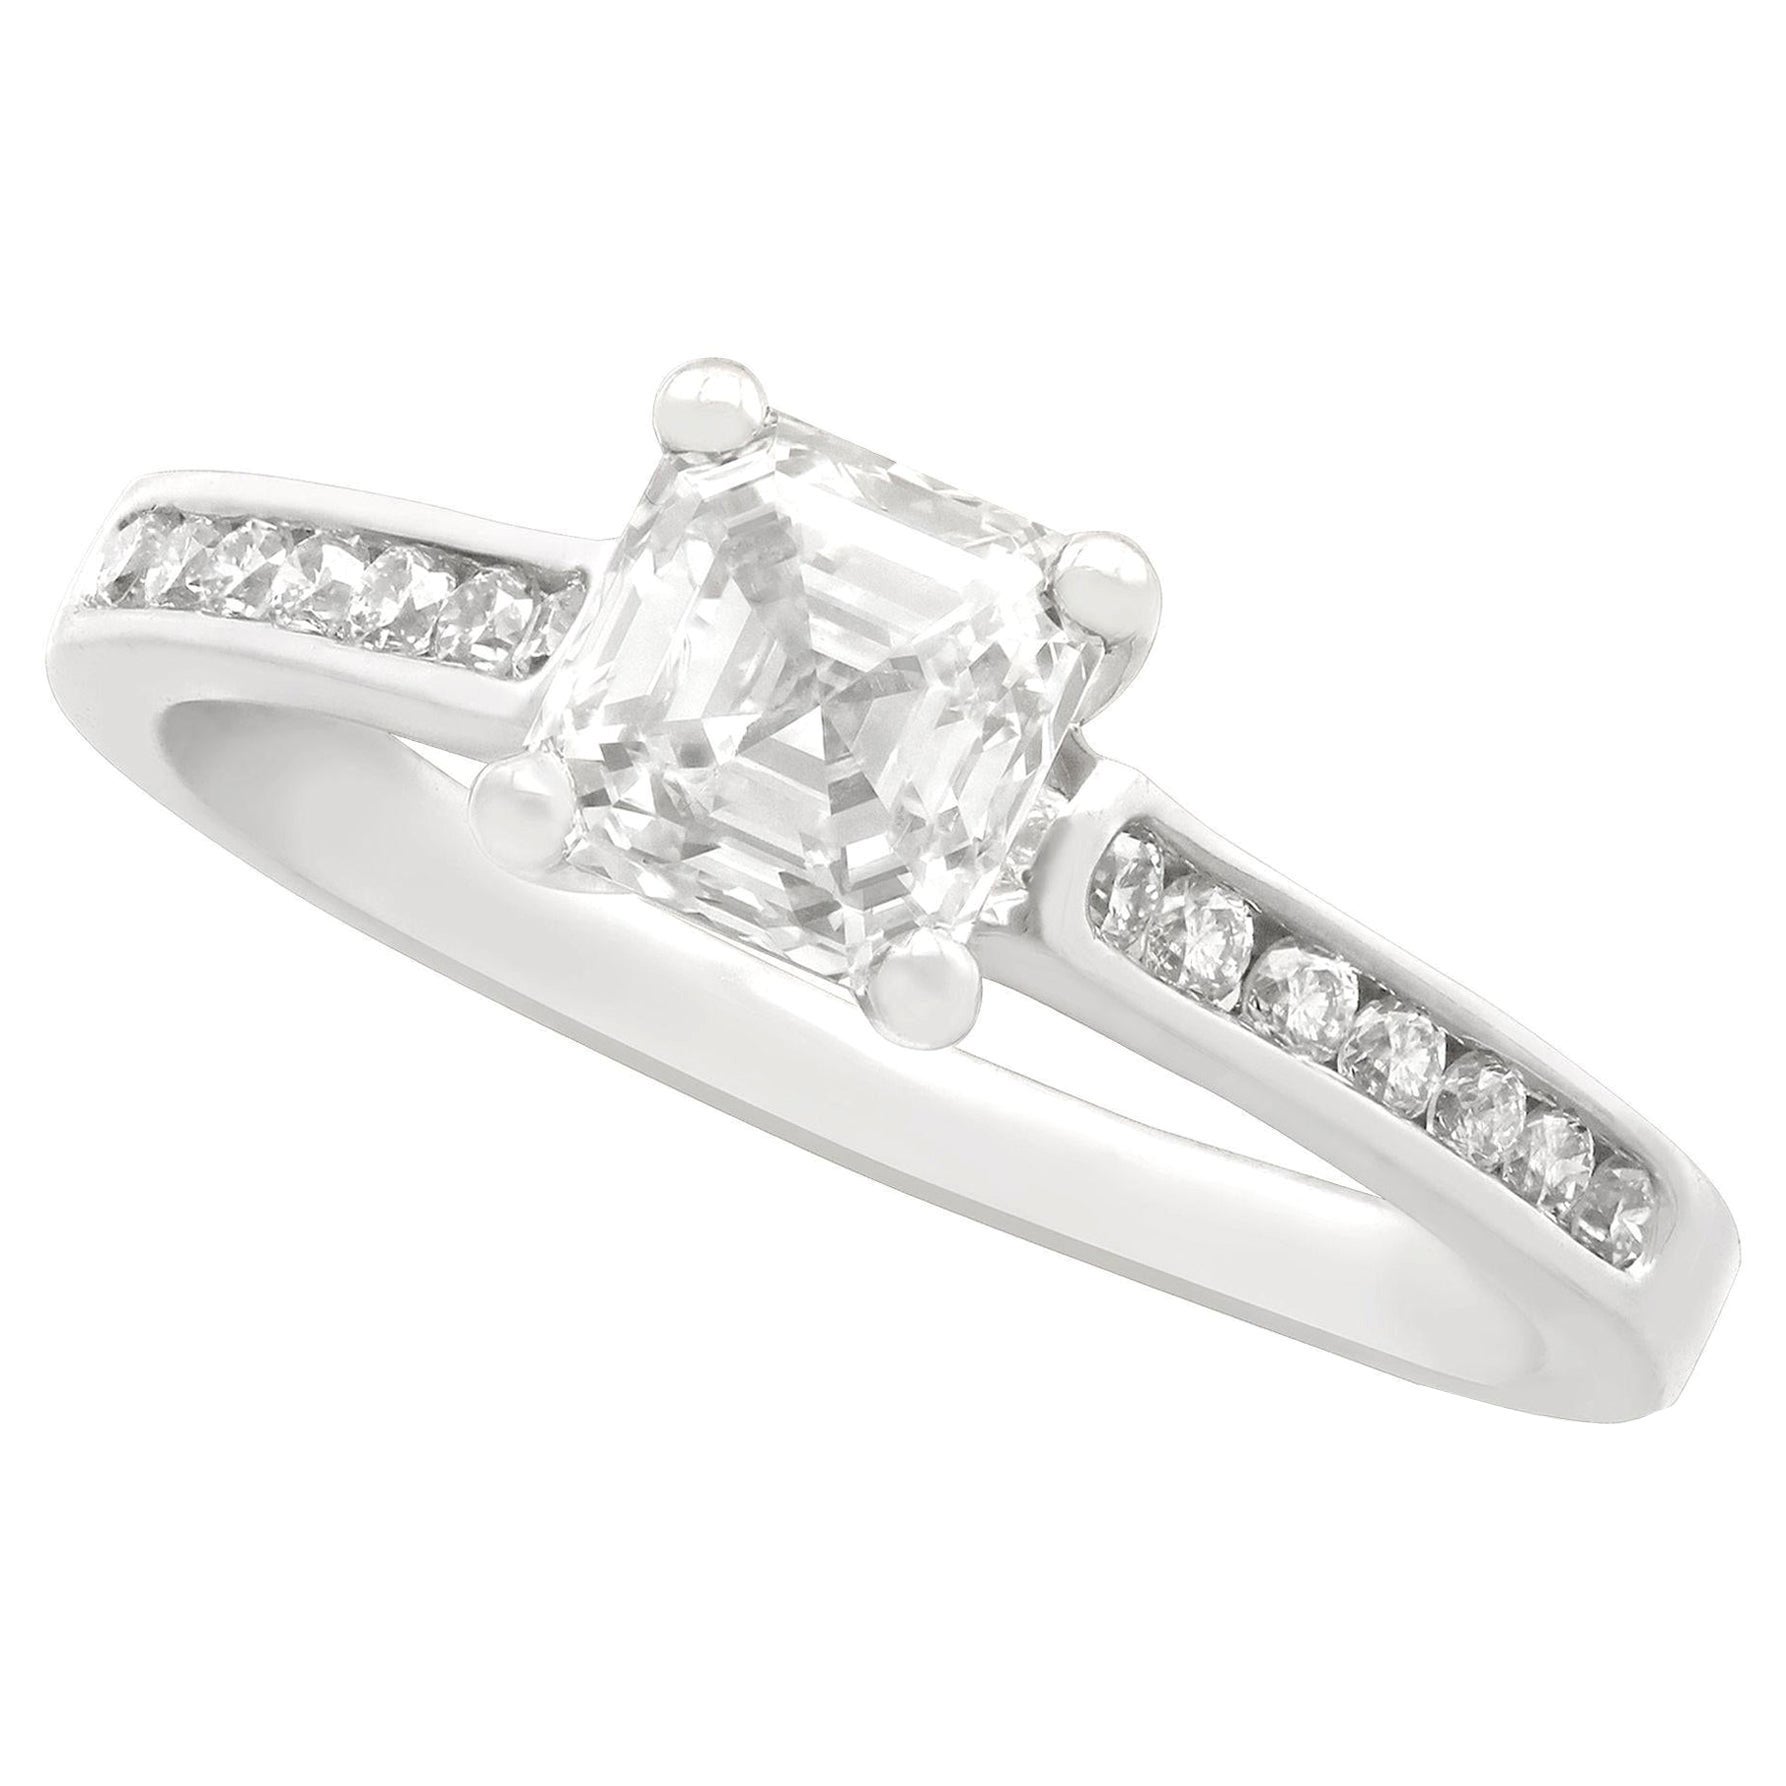 1.19 Carat Diamond and Platinum Solitaire Engagement Ring For Sale